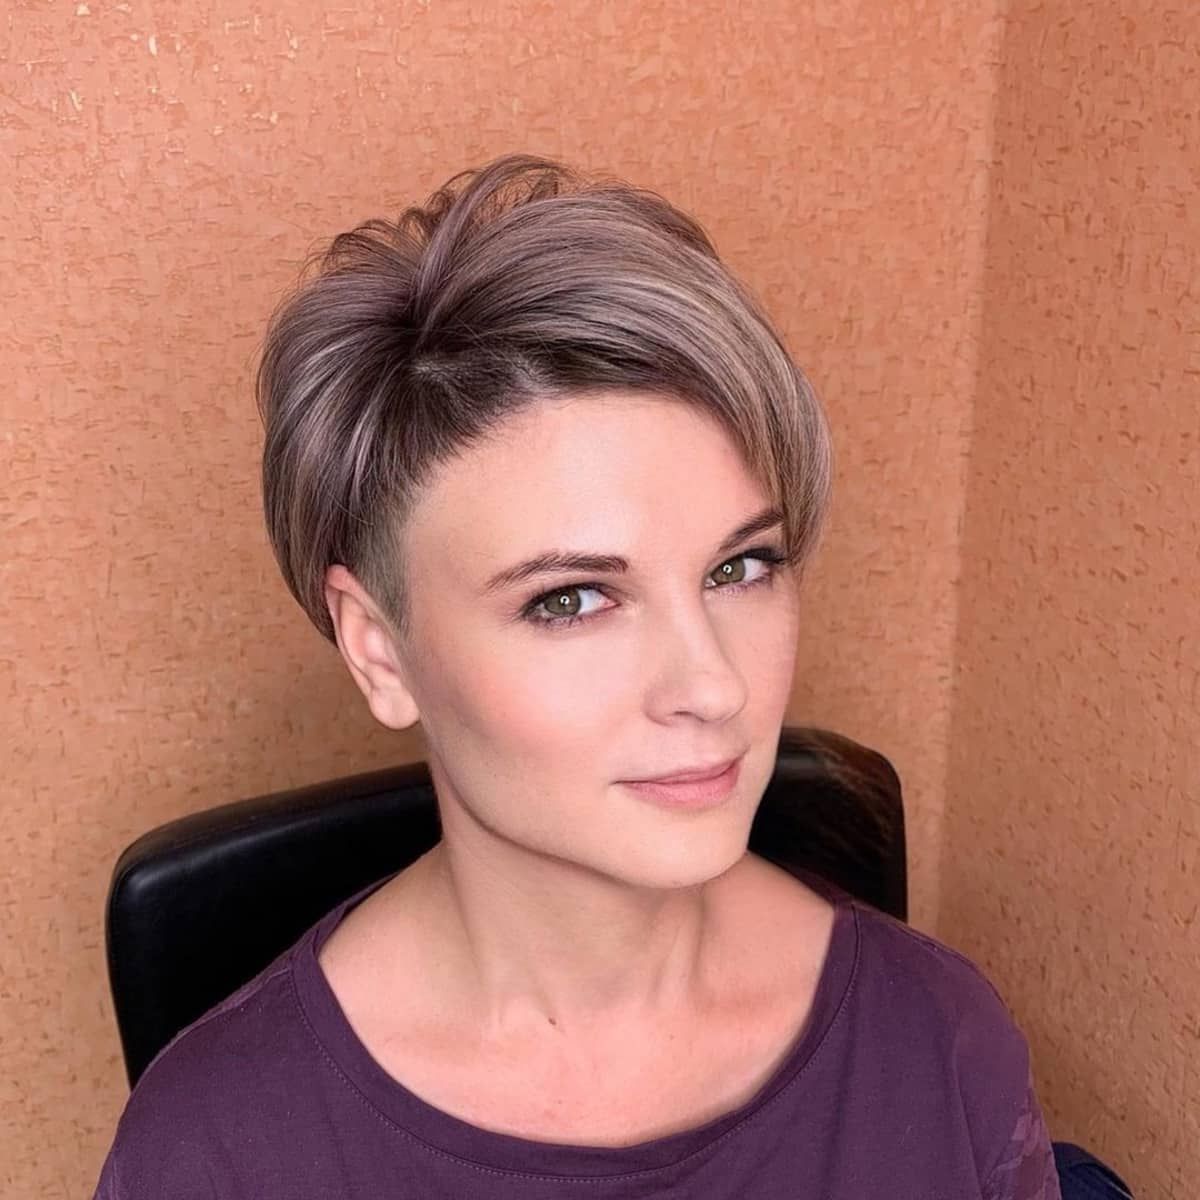 25 Very Short Haircuts For Women Trending In 2022 Within Extra Short Women’s Hairstyles Idea (View 6 of 20)